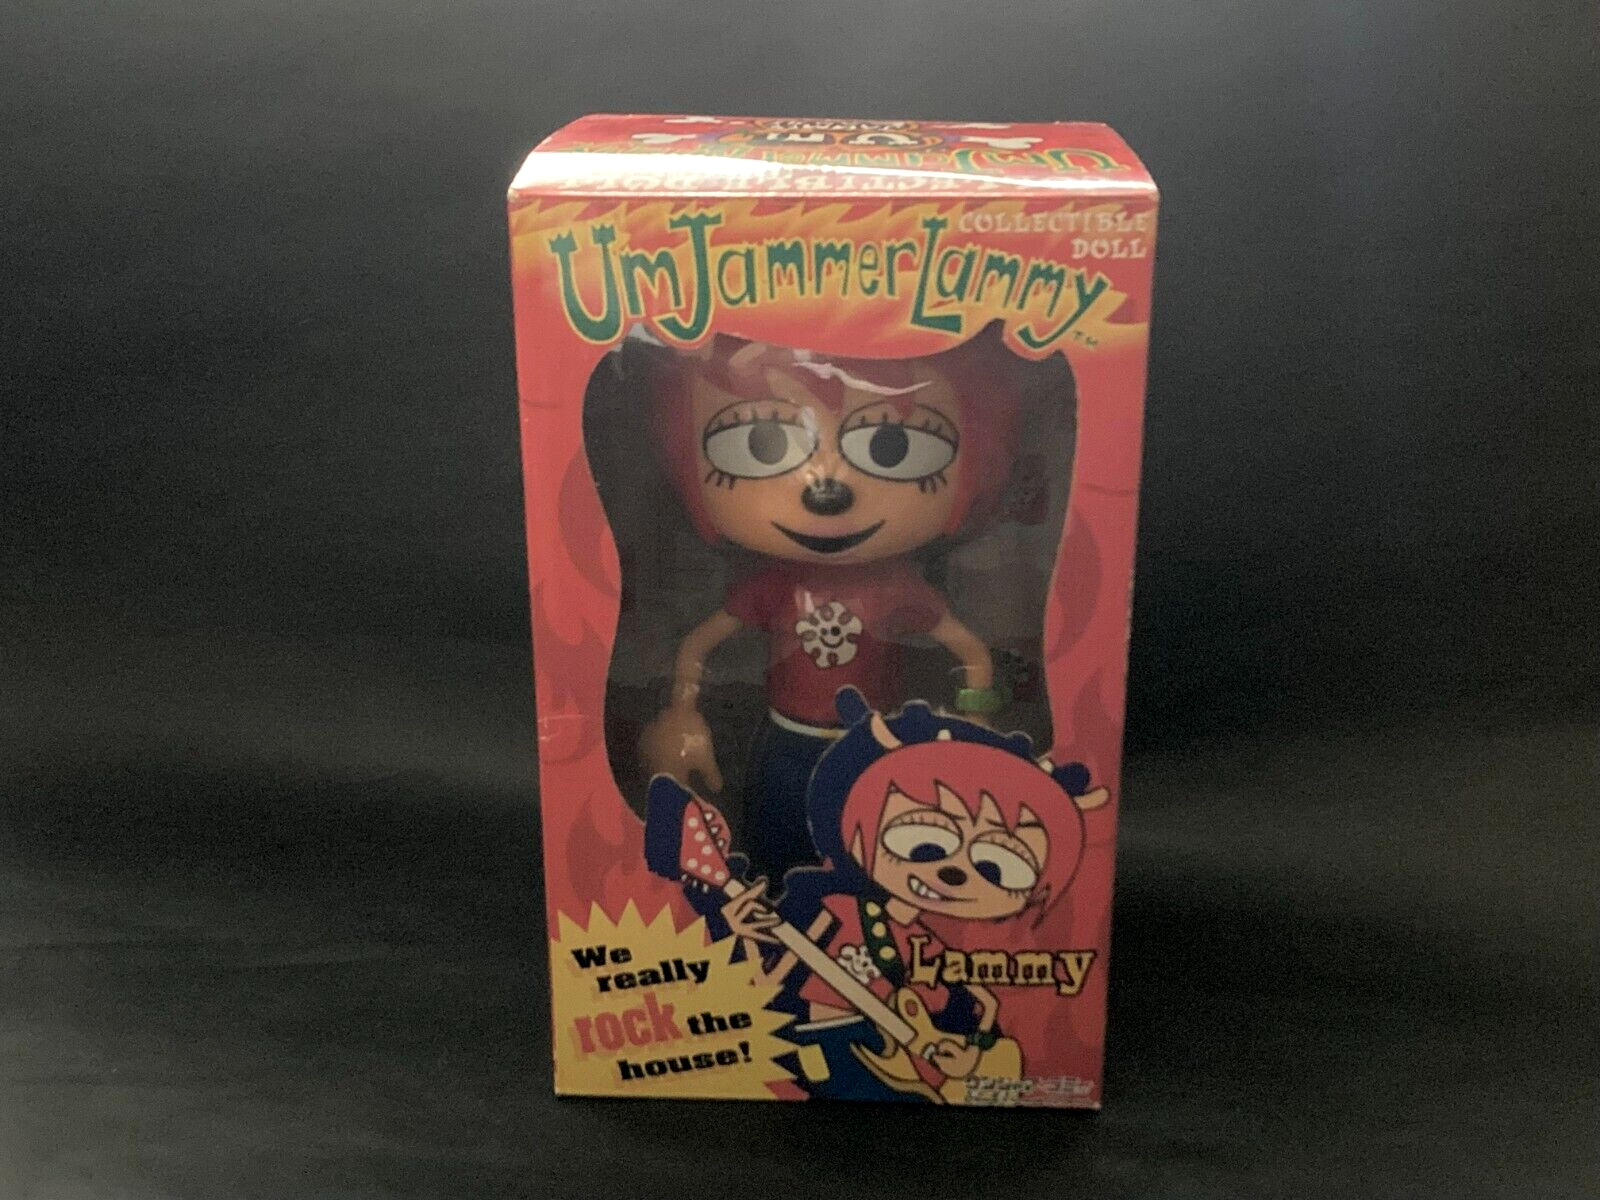 PaRappa the Rapper Um Jammer Lammy Figure Doll Medeicom Toy From Japan 